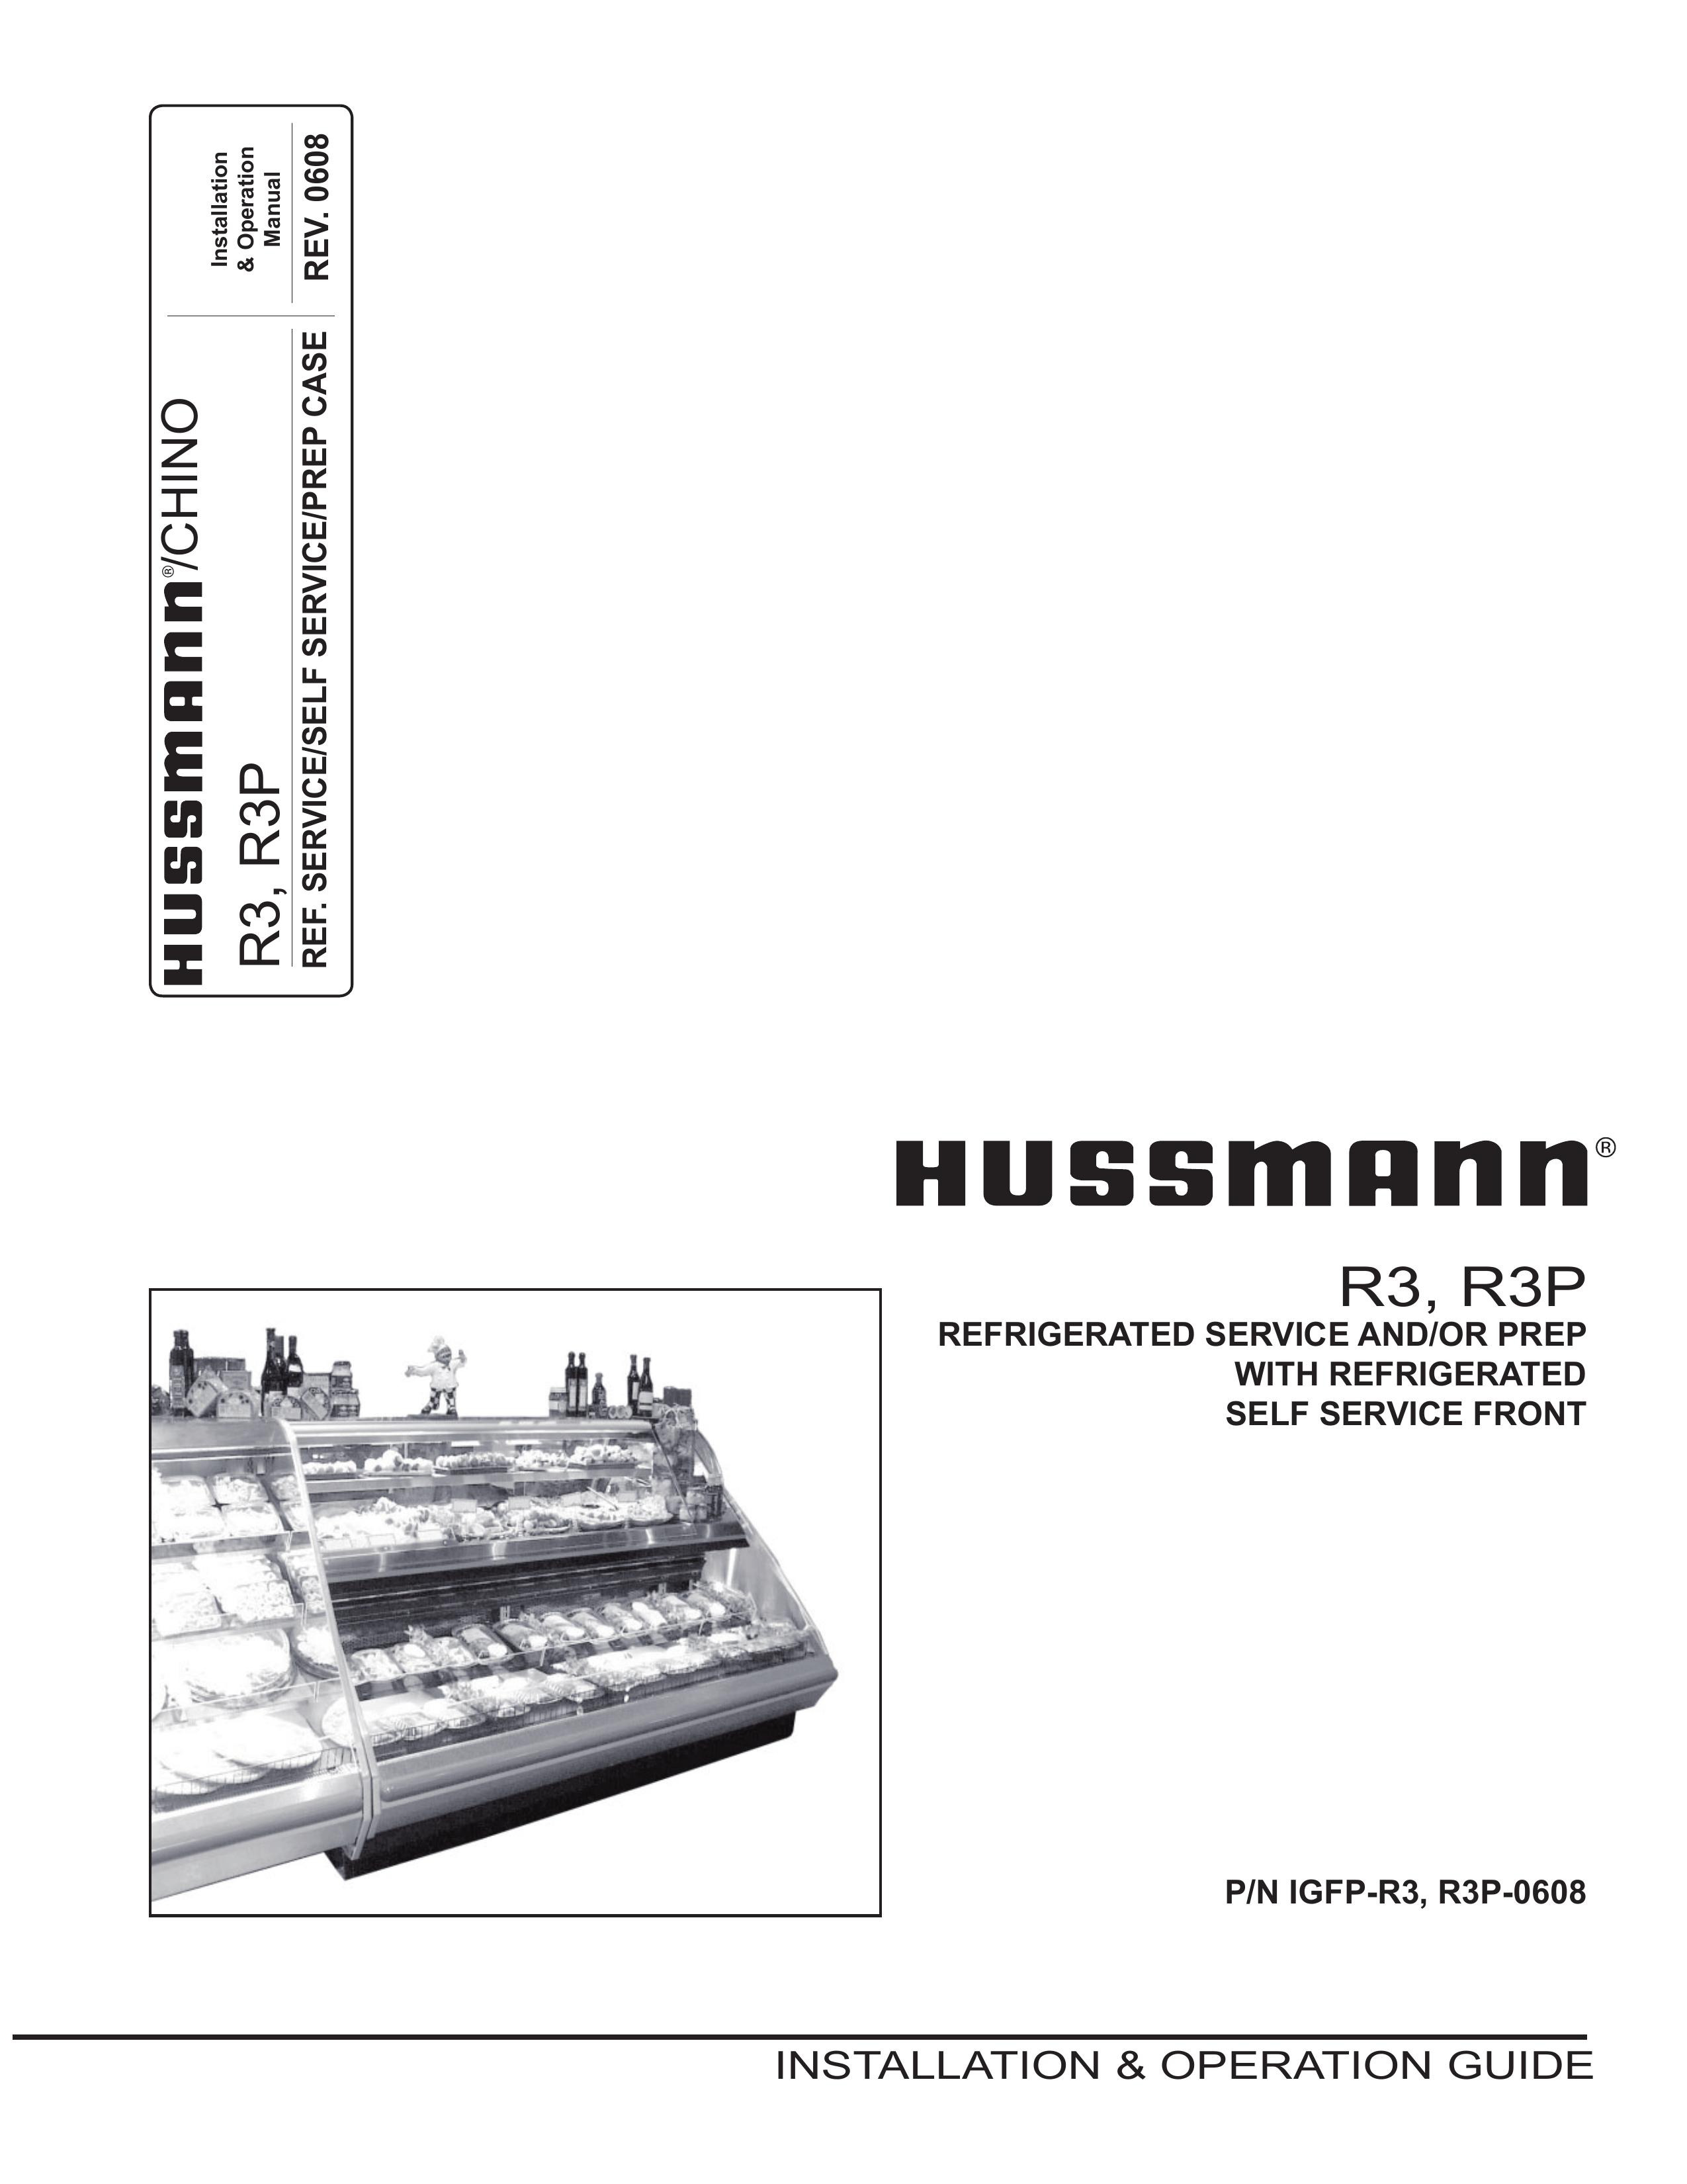 hussman Refrigerated Service and/or Prep with Refrigerated Self Service Front Refrigerator User Manual